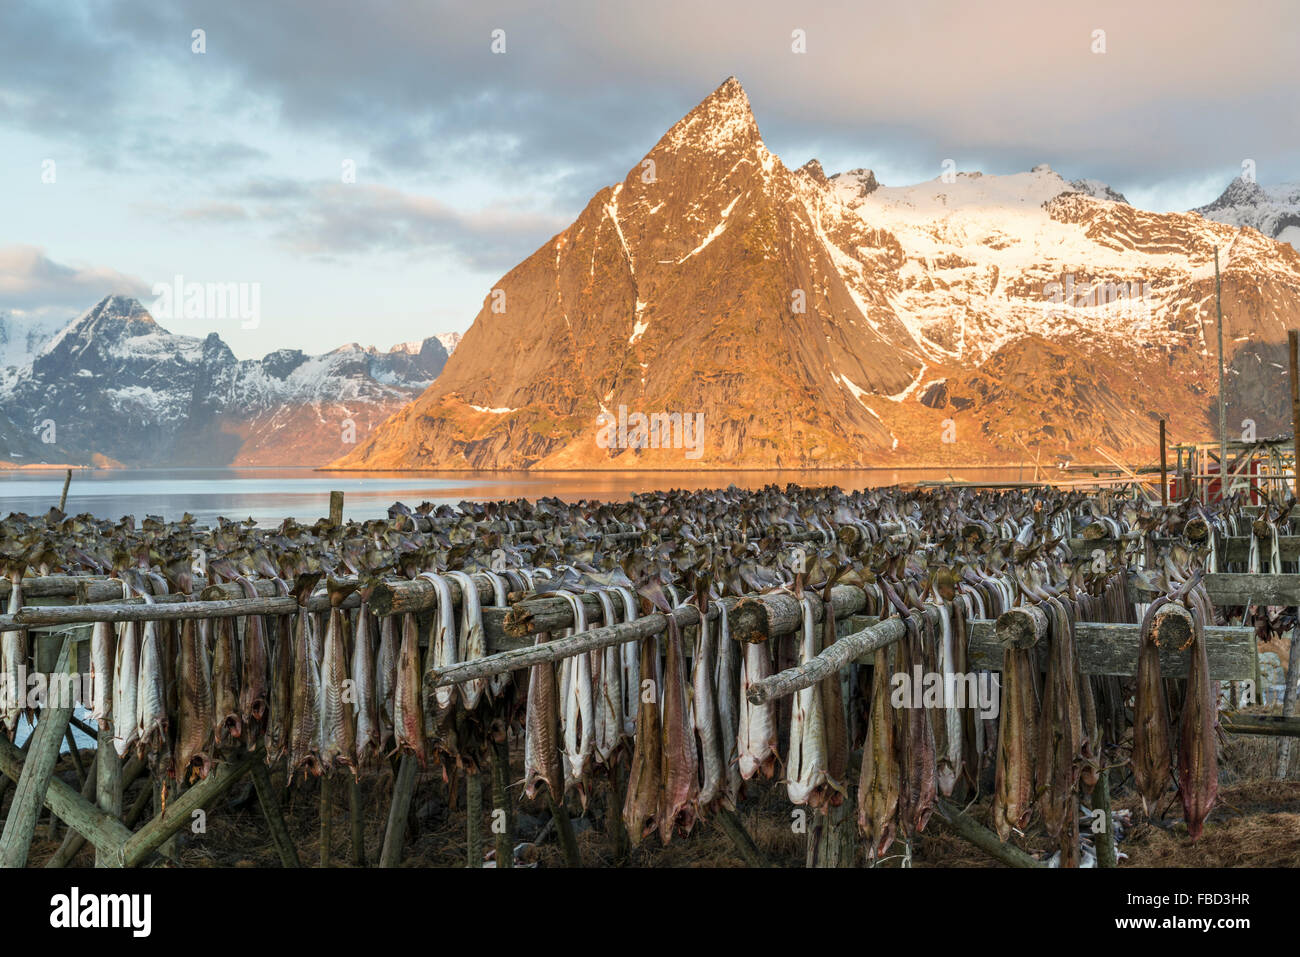 Cod hanging to dry on wooden racks in front of the mountain Olstinden, Moskenes, Lofoten, Norway Stock Photo